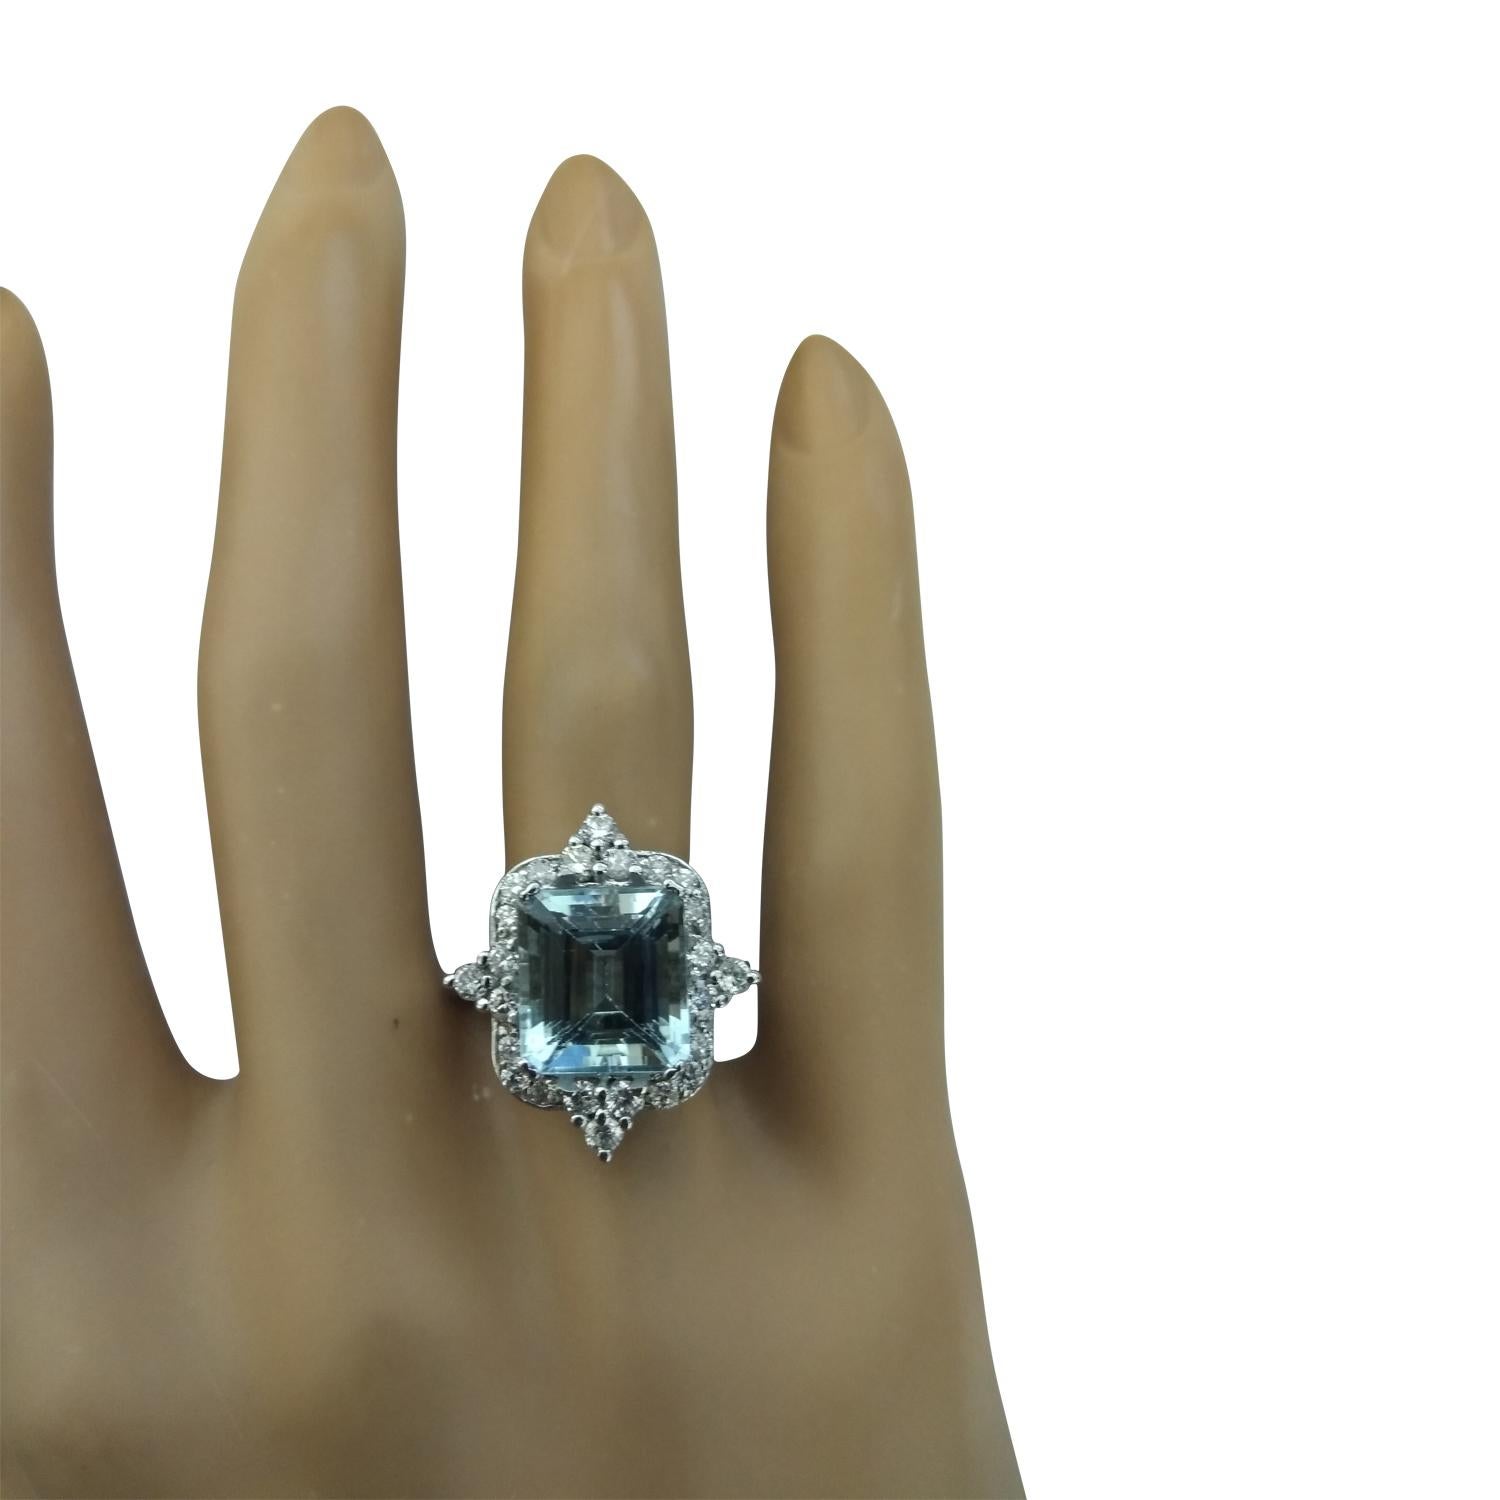 5.05 Carat Natural Aquamarine 14 Karat Solid White Gold Diamond Ring
Stamped: 14K 
Total Ring Weight: 5.6 Grams 
Aquamarine Weight 4.35 Carat (10.00x8.00 Millimeters)
Diamond Weight: 0.70 carat (F-G Color, VS2-SI1 Clarity )
Face Measures: